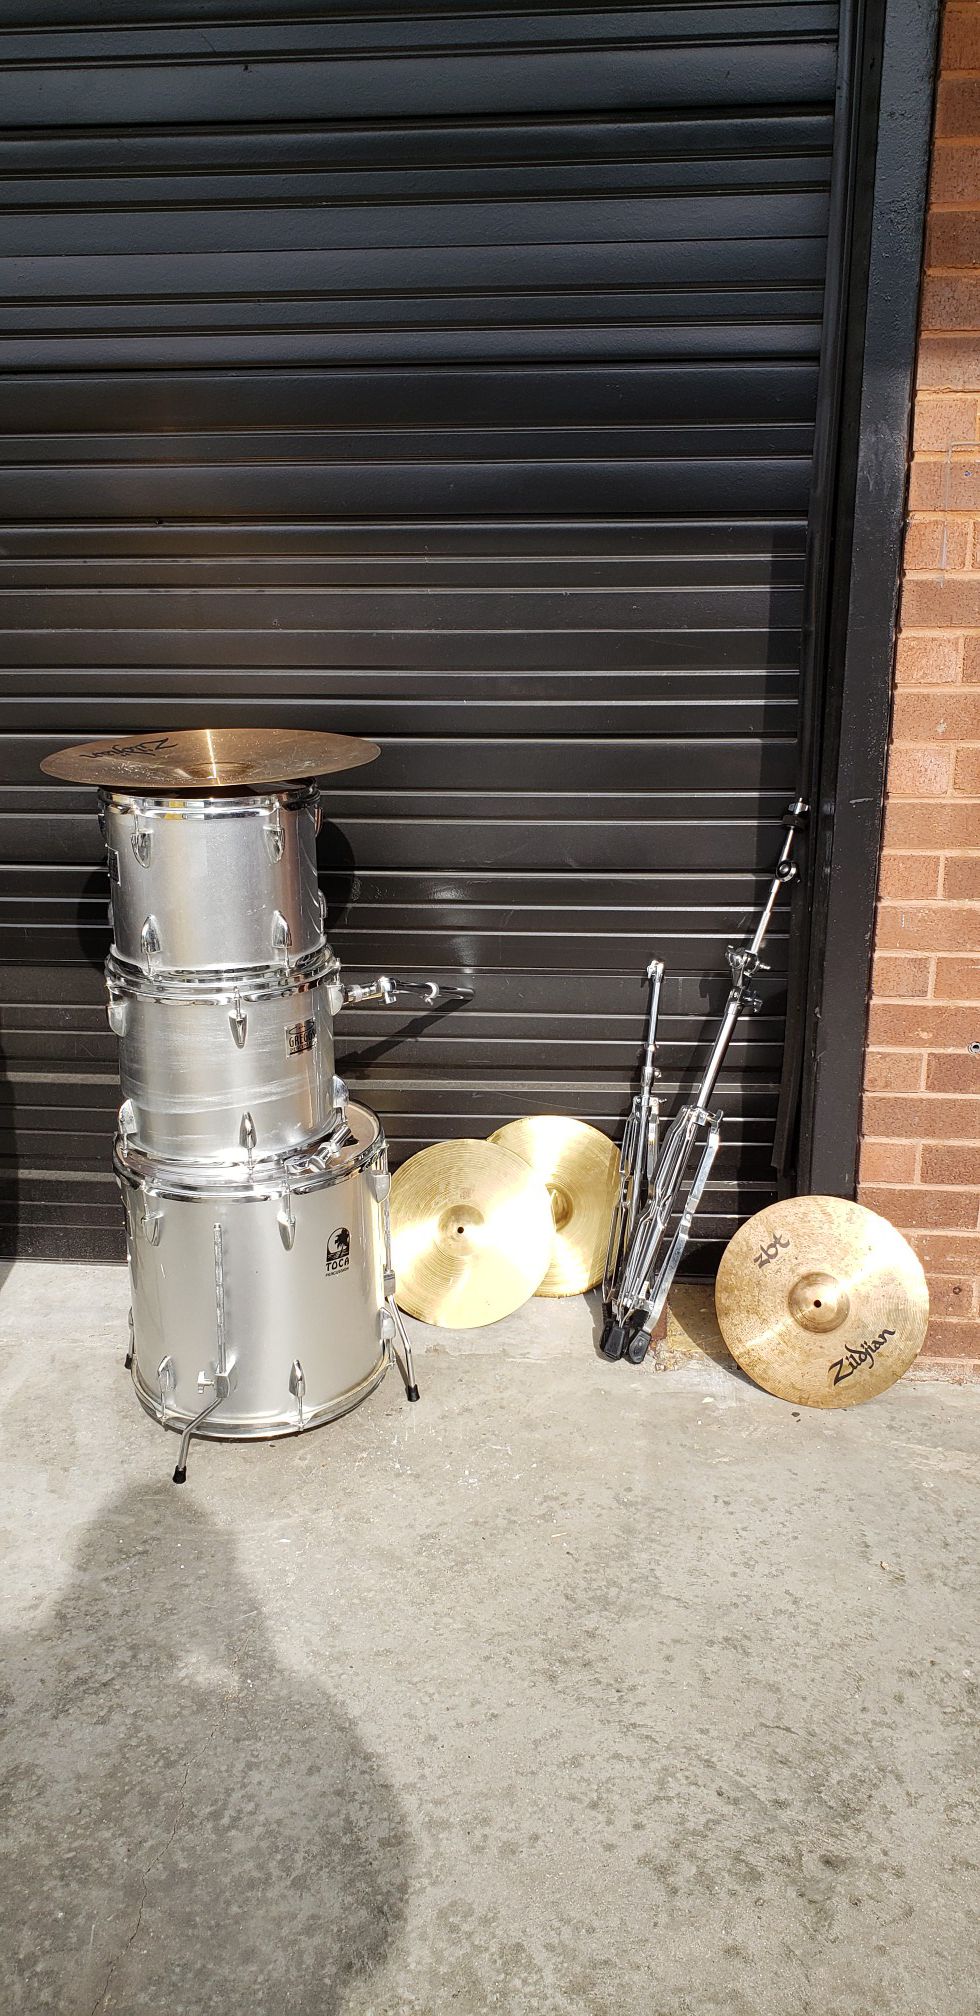 SILVER SPARKLE SET Drum Kits Silver/Gray with Symbols